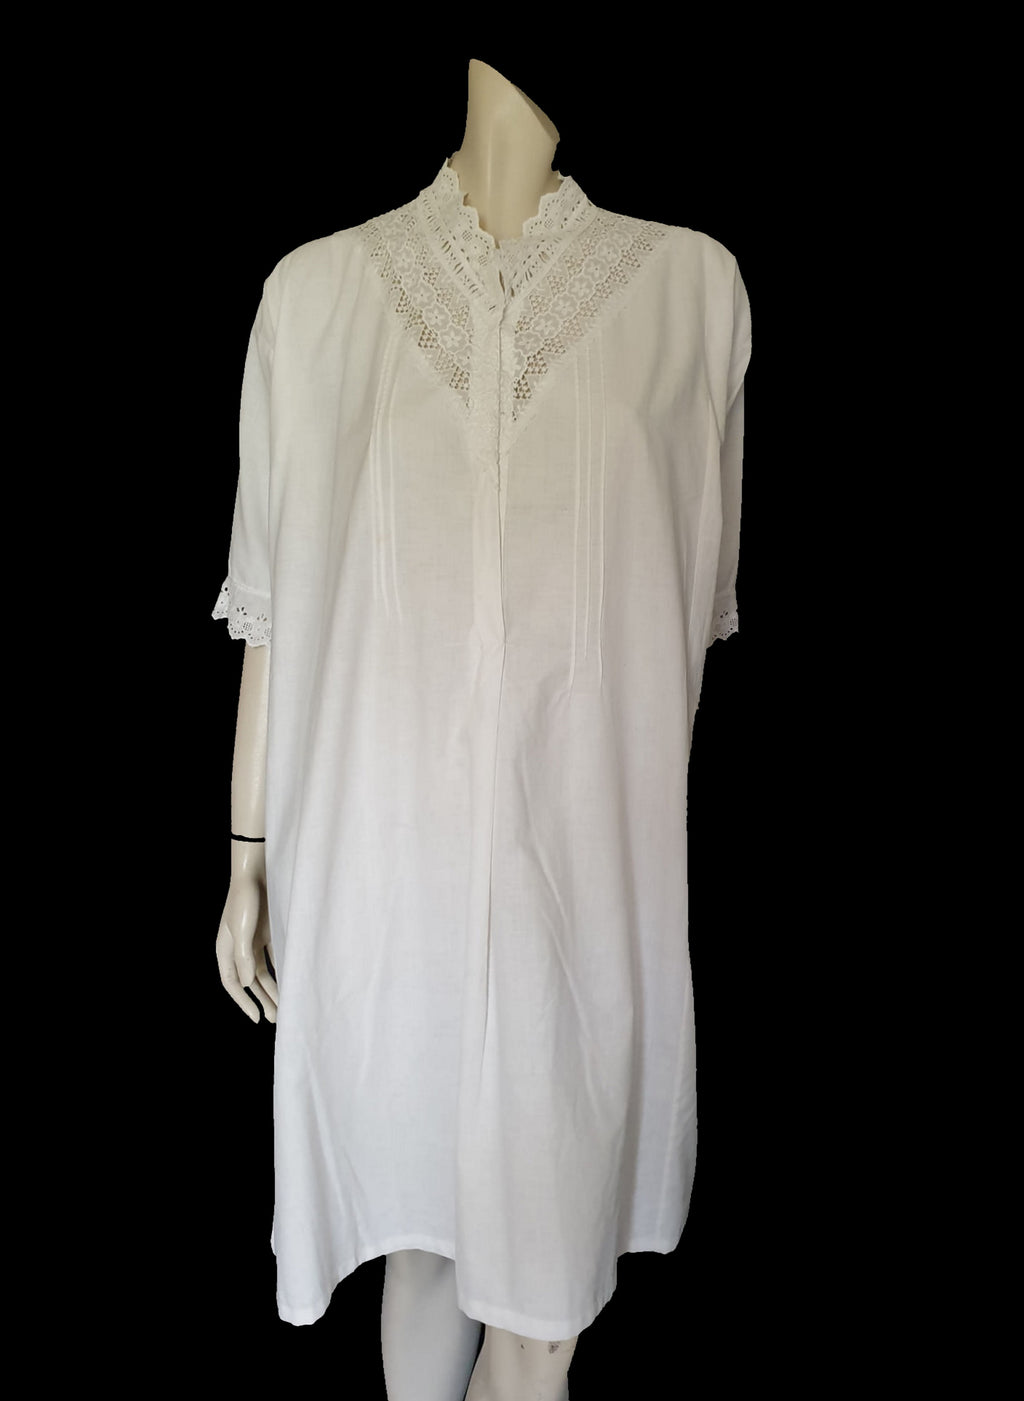 antique 1920s edwardian nightgown boho dress with broderie anglaise eyelet trim - medium